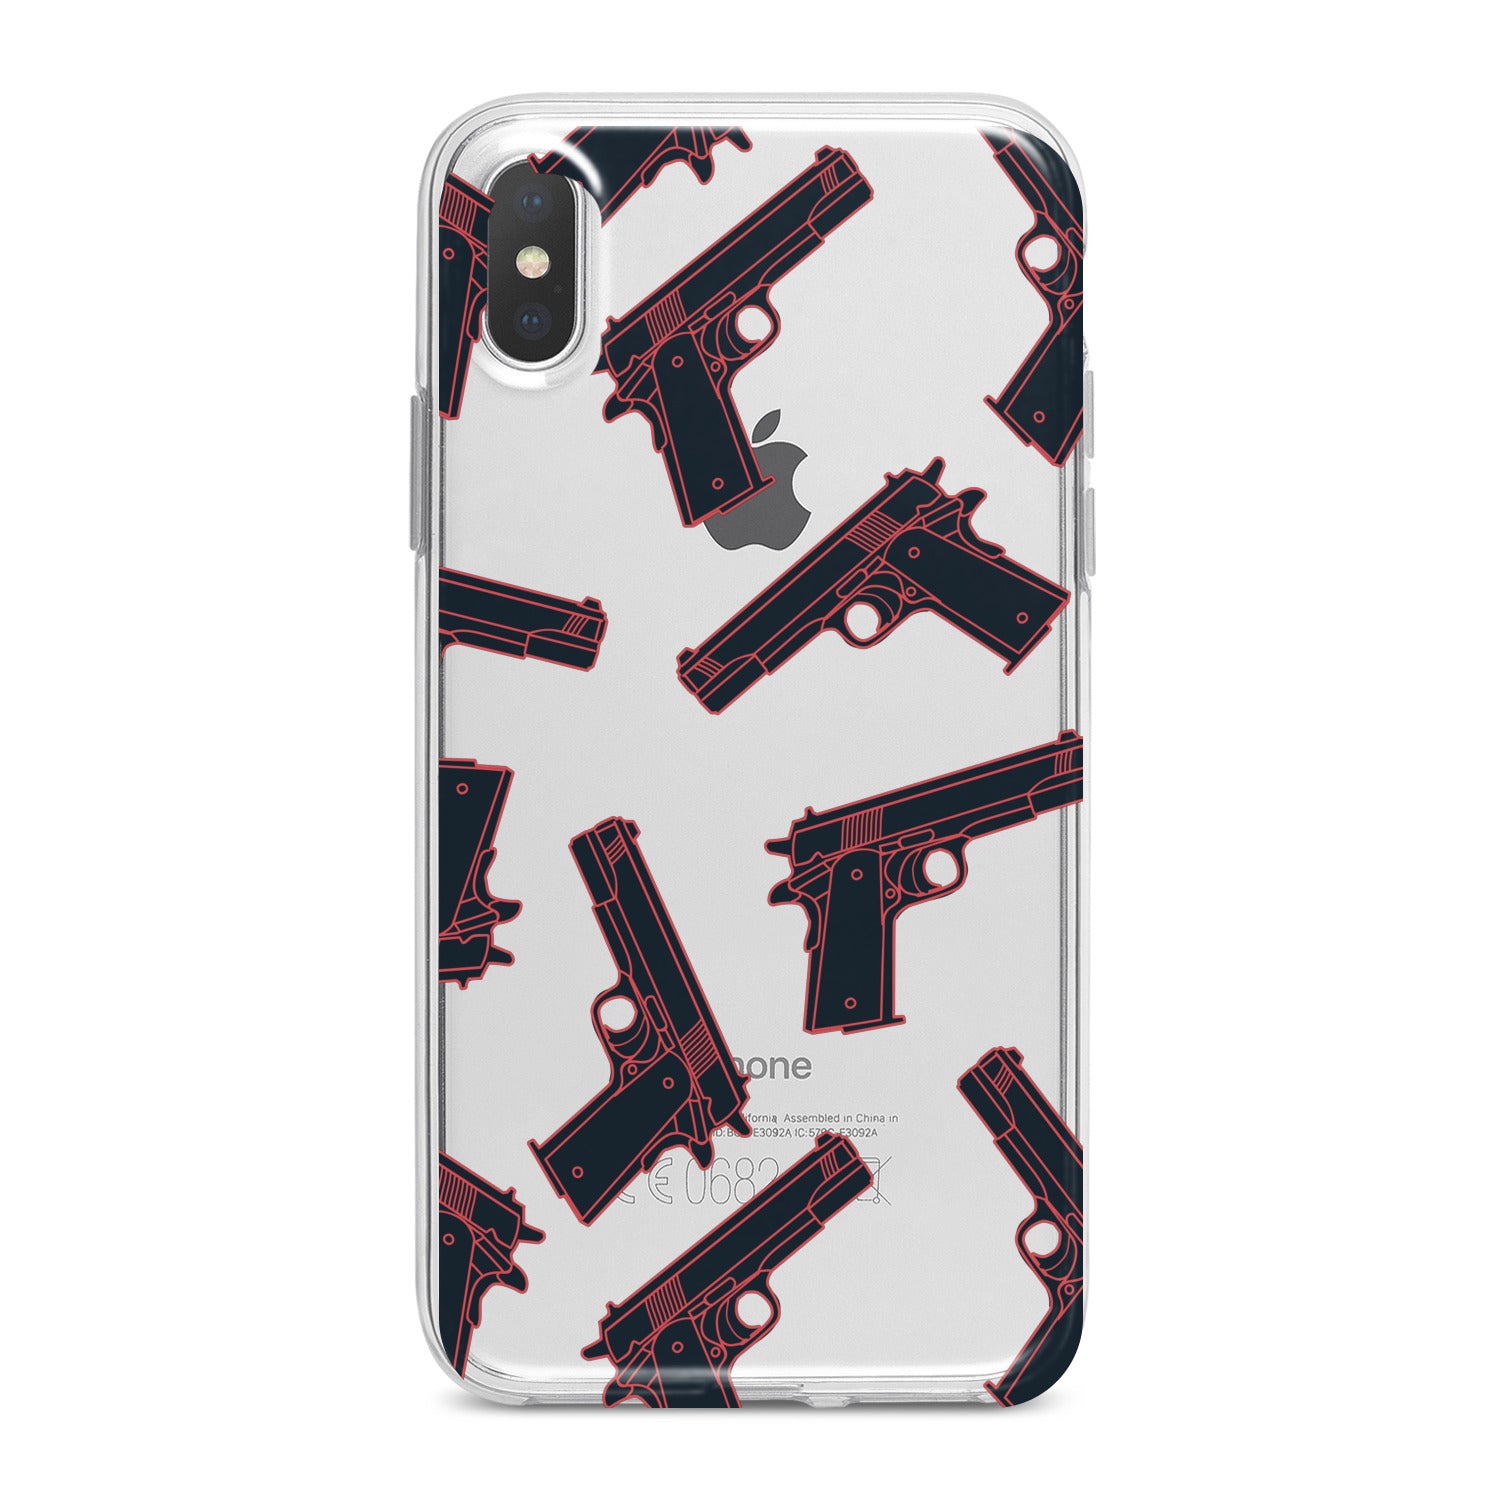 Lex Altern Gun Pattern Phone Case for your iPhone & Android phone.